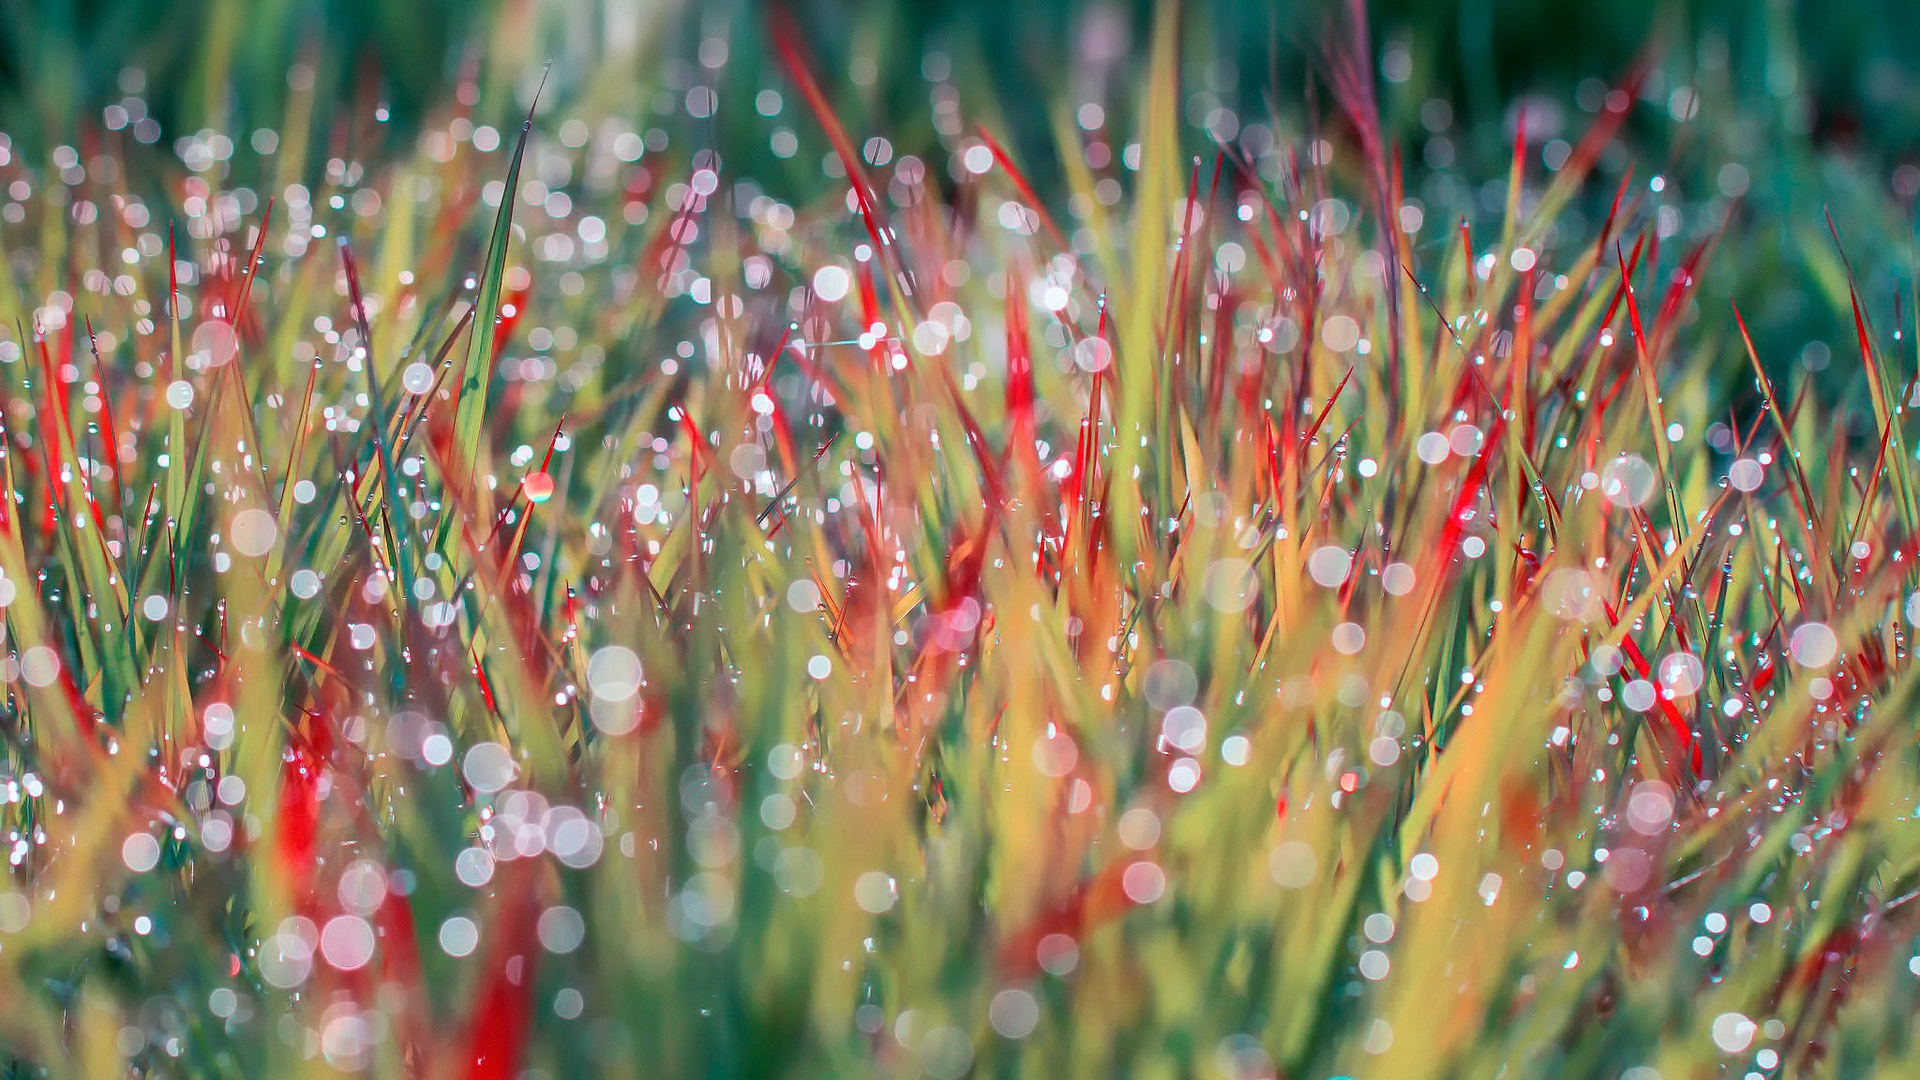 Morning Dew on Grass for 1920 x 1080 HDTV 1080p resolution